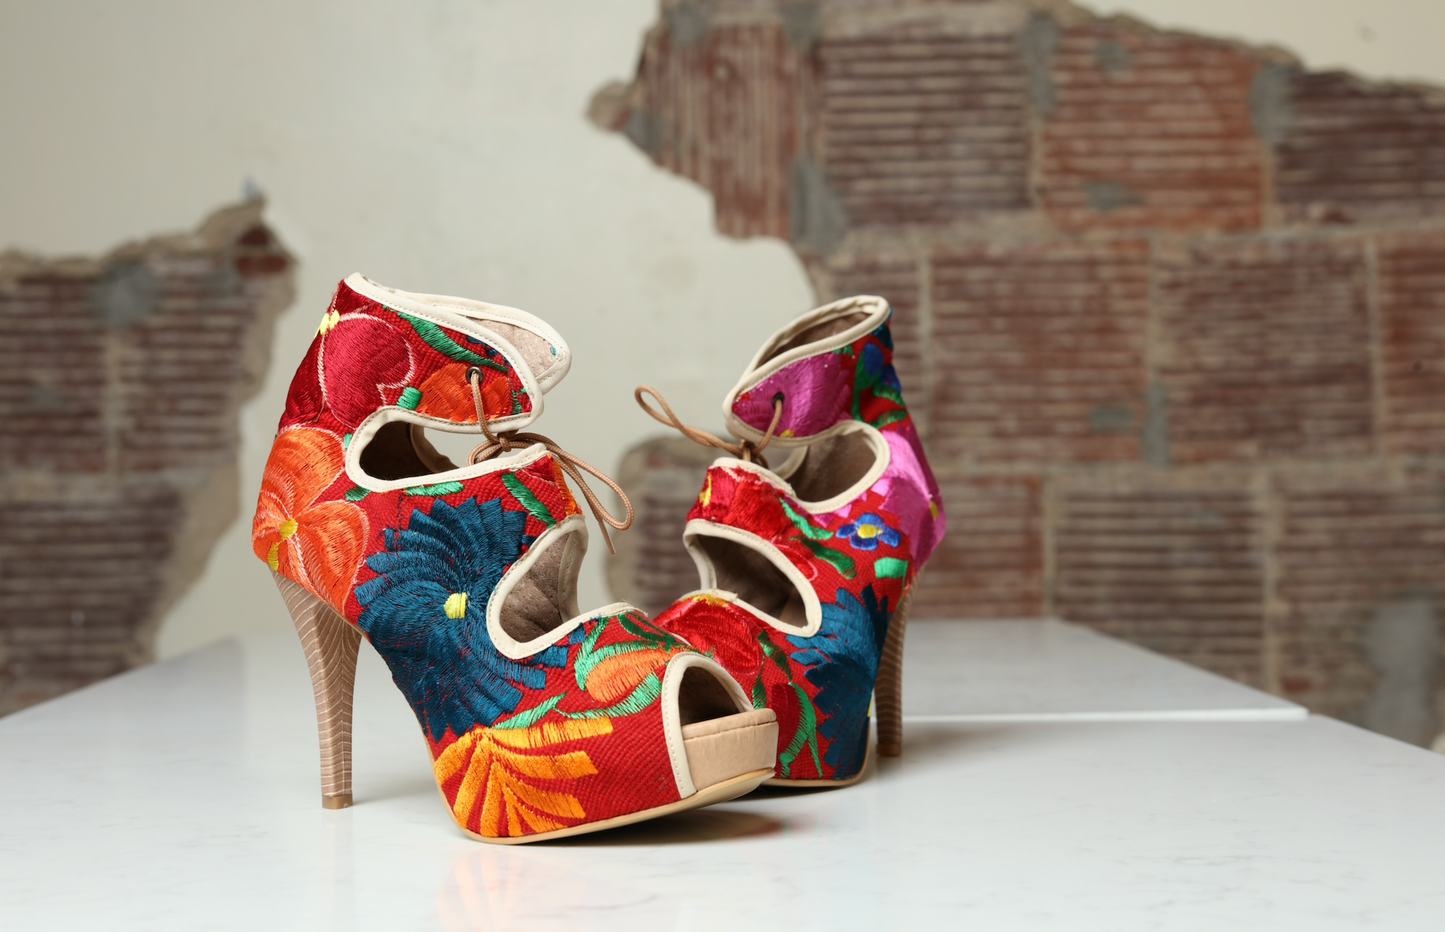 High heels with blue, red and yellow floral embroidery.